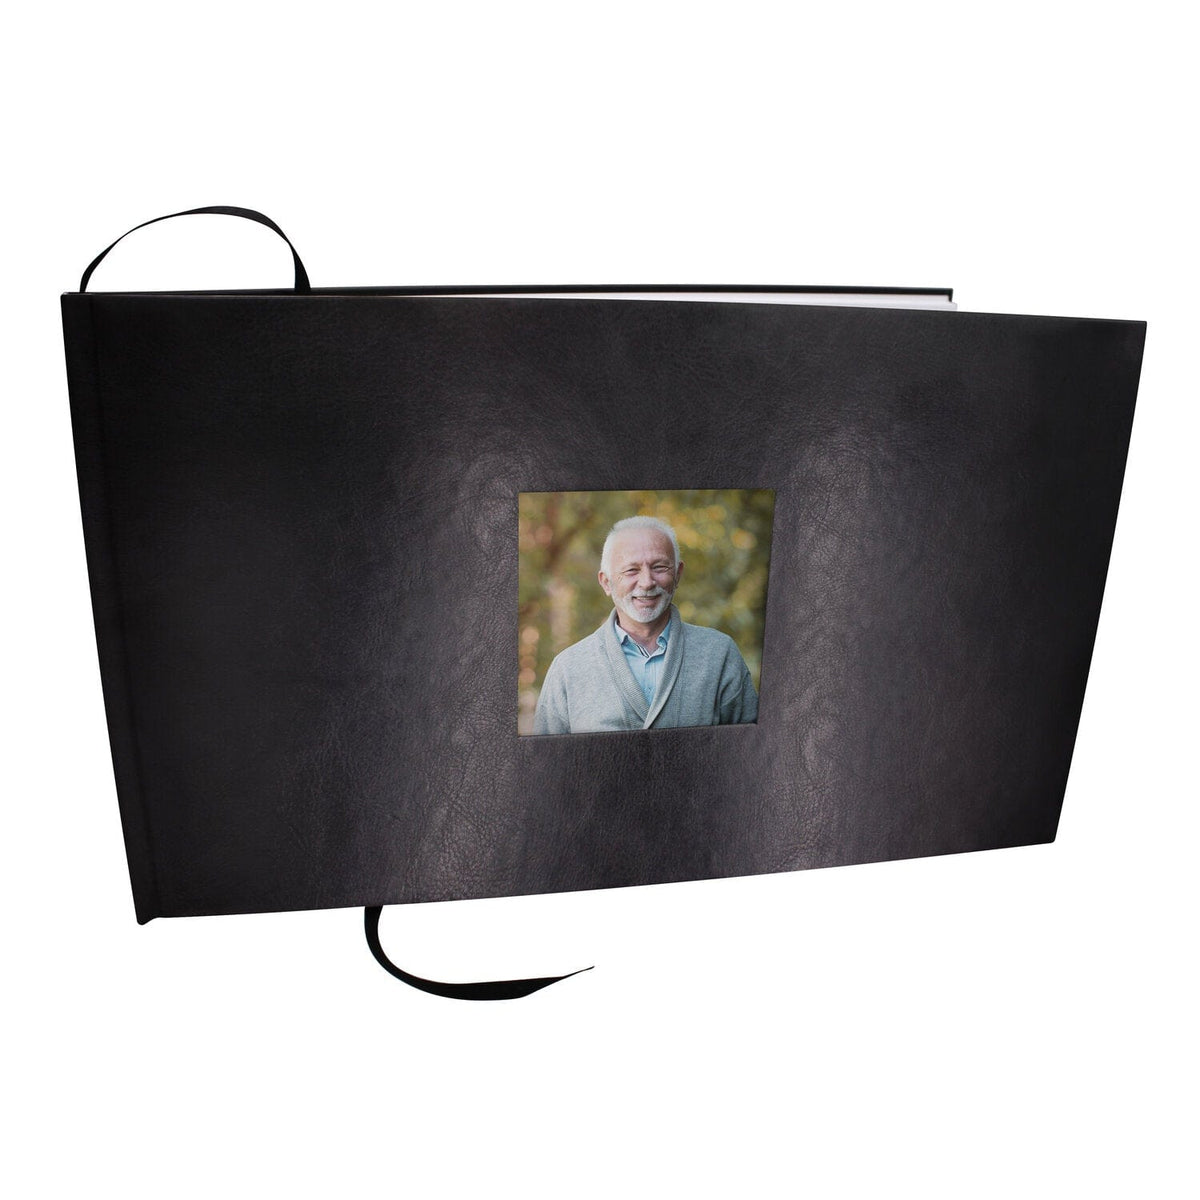 Commemorative Cremation Urns Home &amp; Garden Black Textured Guest Book for Funeral or Memorial Service